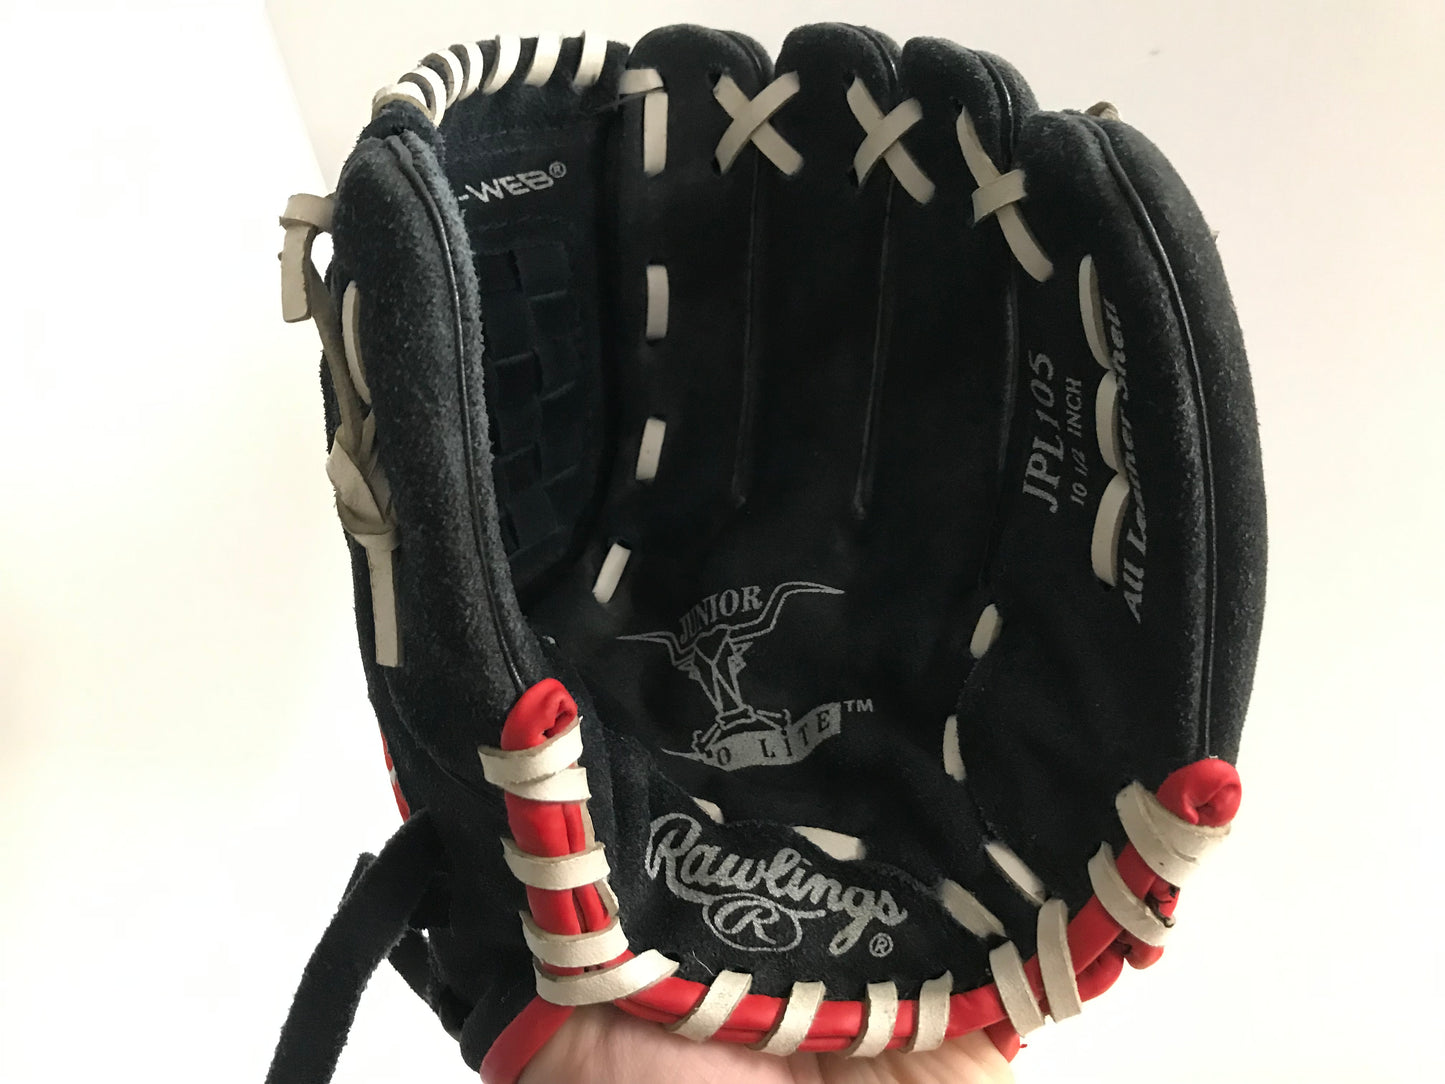 Baseball Glove Child Size 10.5 inch Rawlings Red Black Soft Leather Fits on Left Hand